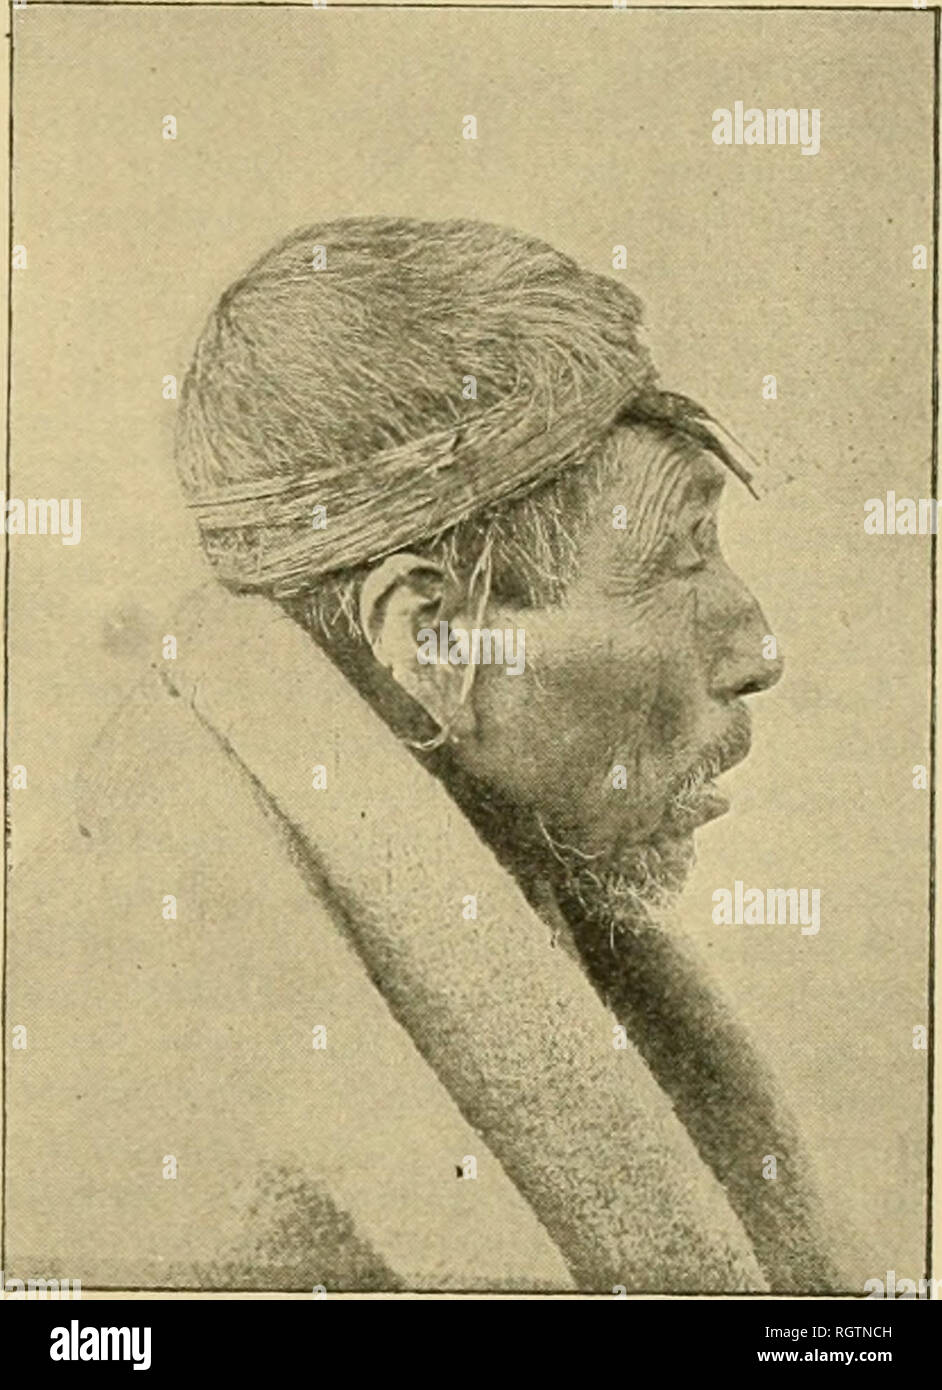 . Bulletin. Ethnology. BULL. 30] KOROVINSKI KOSKIMO 727 made Atka the headquarters of the west- ern district of the Aleutians.—Petroff in 10th Census, Alaska, 21, 1884. Korovinski. An Aleut village on Koro- vinid., Alaska; pop. 44 in 1880, 41 in 1890. Korovinsky,—PetrofY, Rep. on Alaska. 25, 1881. Korusi. A tribe of the Patwin division of the Copehan family, formerly living at Colusa, Colusa co., Cal. It was once com- paratively populous, as Gen. Bidwell states that in 1849 the village of the Korusi contained at least 1,000 inhaljitants (Pow- ers in Cont. N. A. Ethnol., in, 219, 1877). They ar Stock Photo